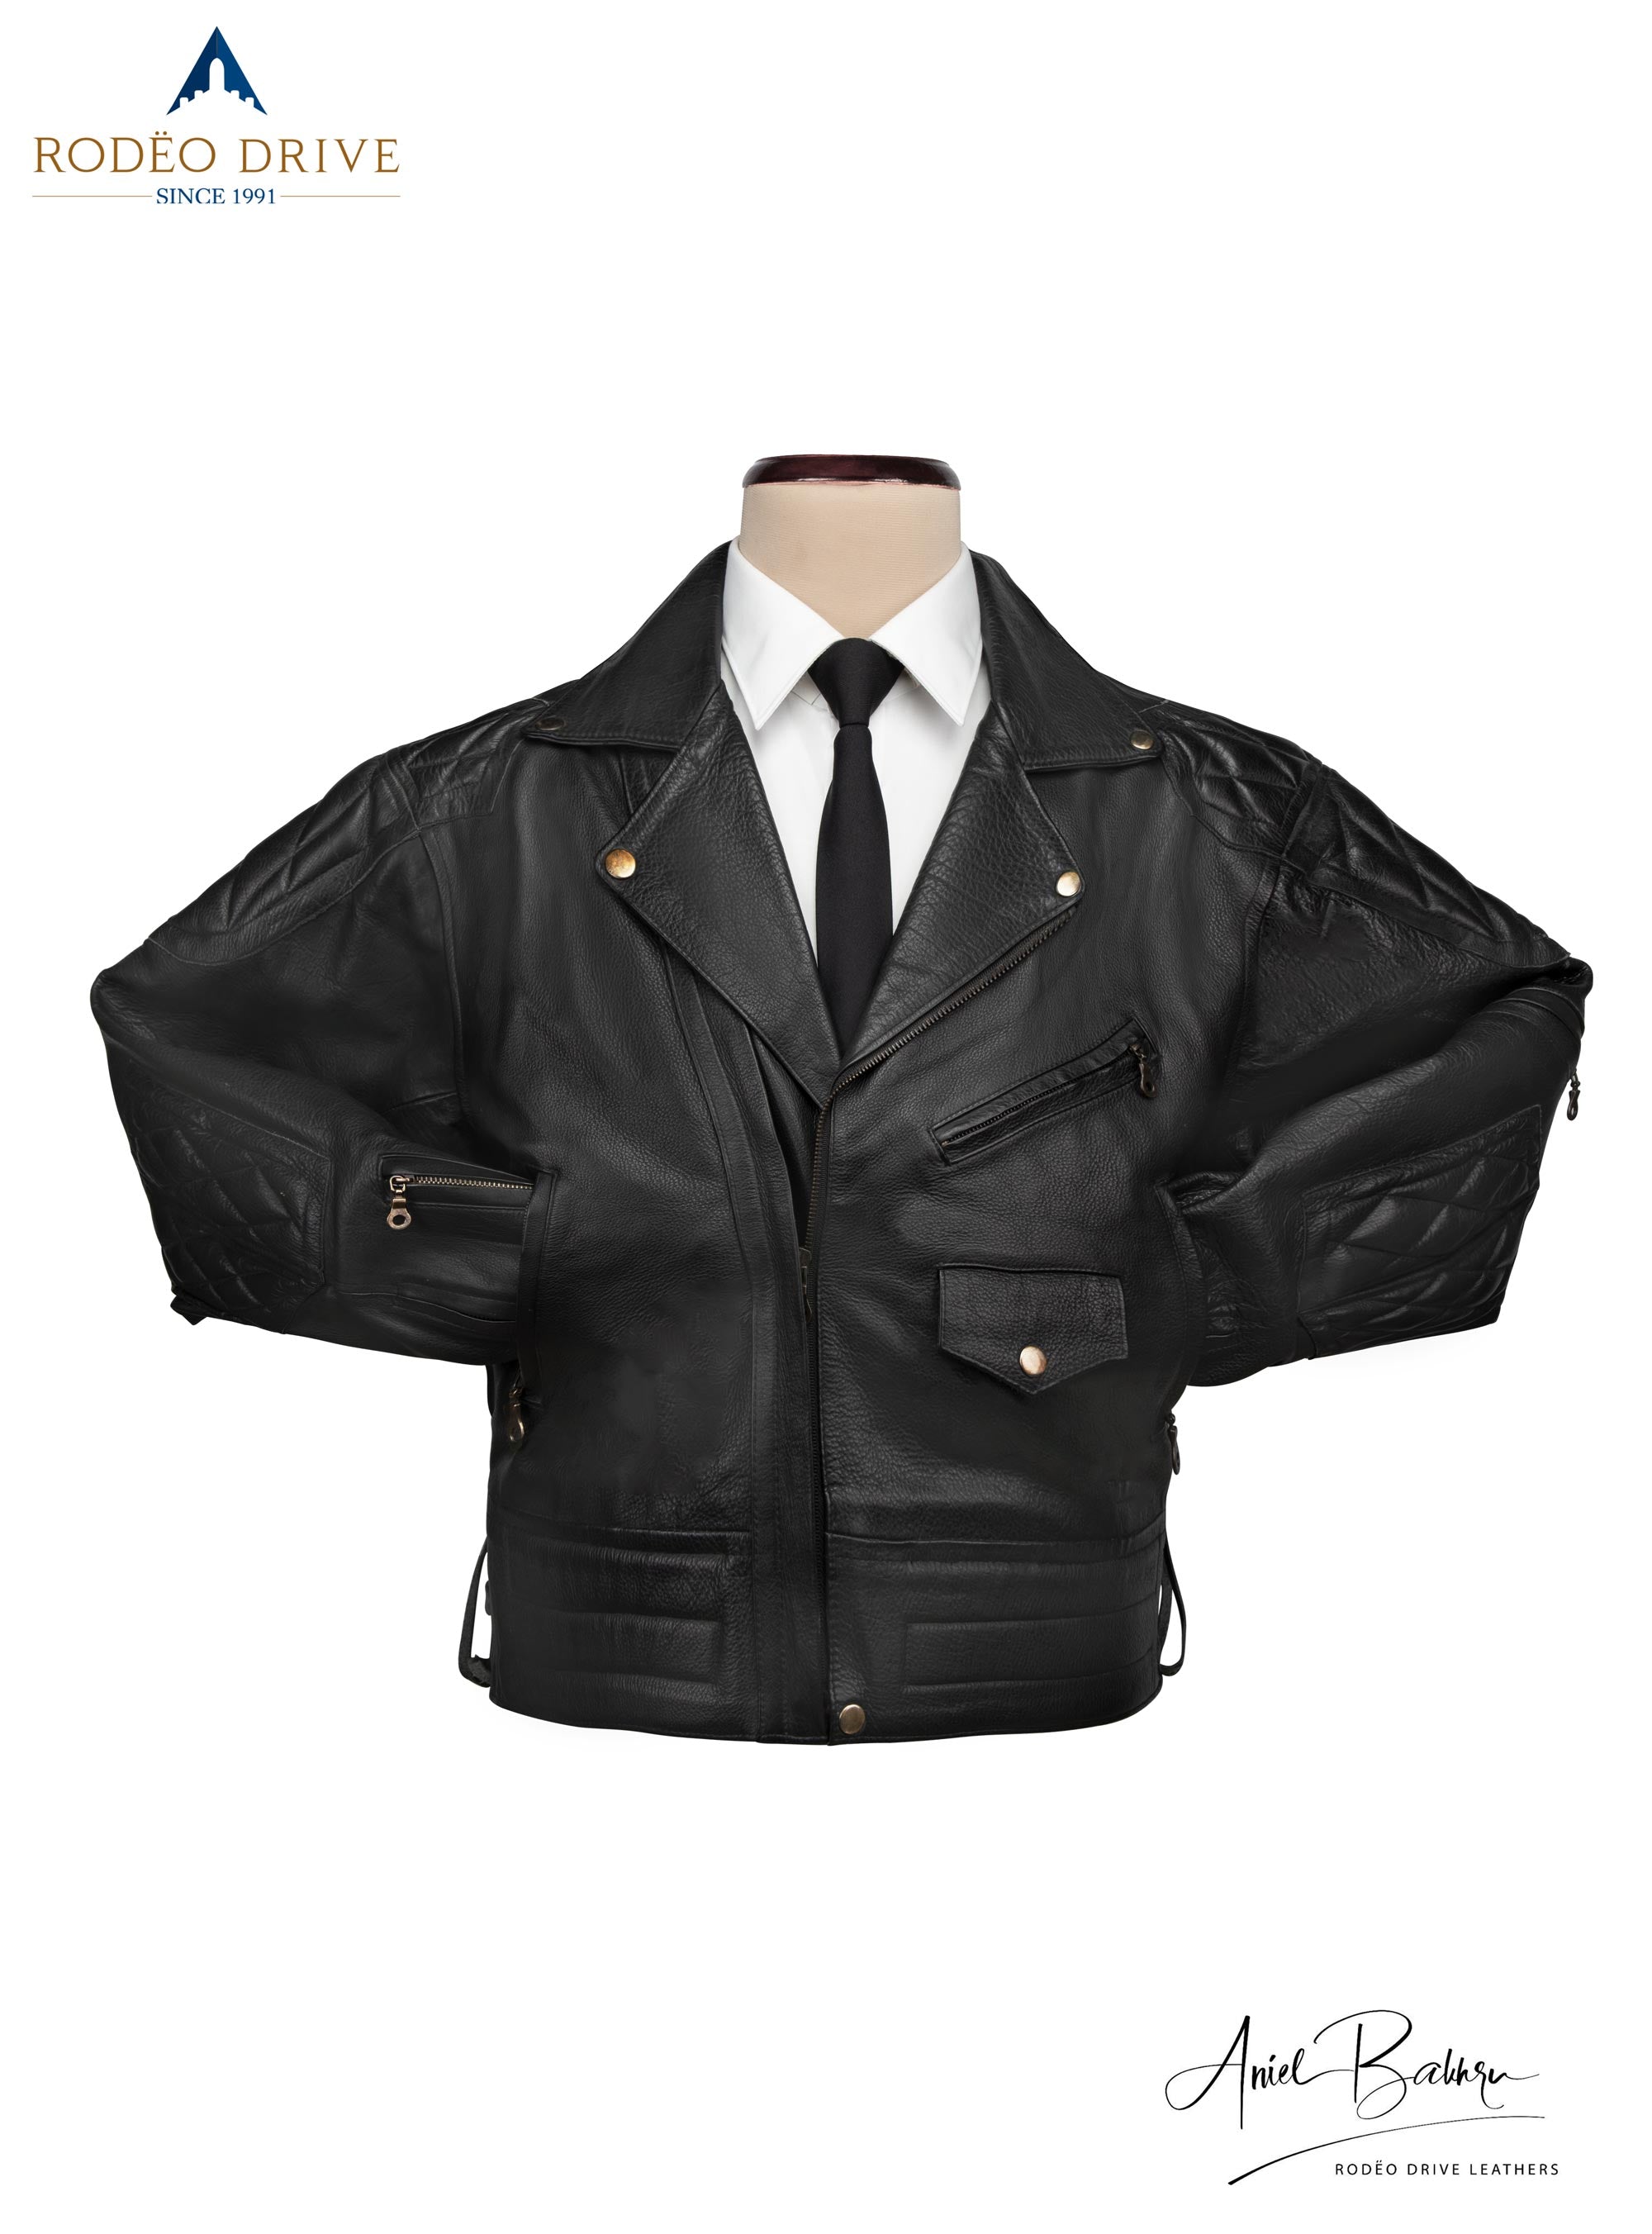 Front image of black WEAZEL BIKER JACKET.. It is displayed on mannequin. a white shirt is tucked in with a black neck tie. Both its hand are tucked inside slit pockets. It is half zipped